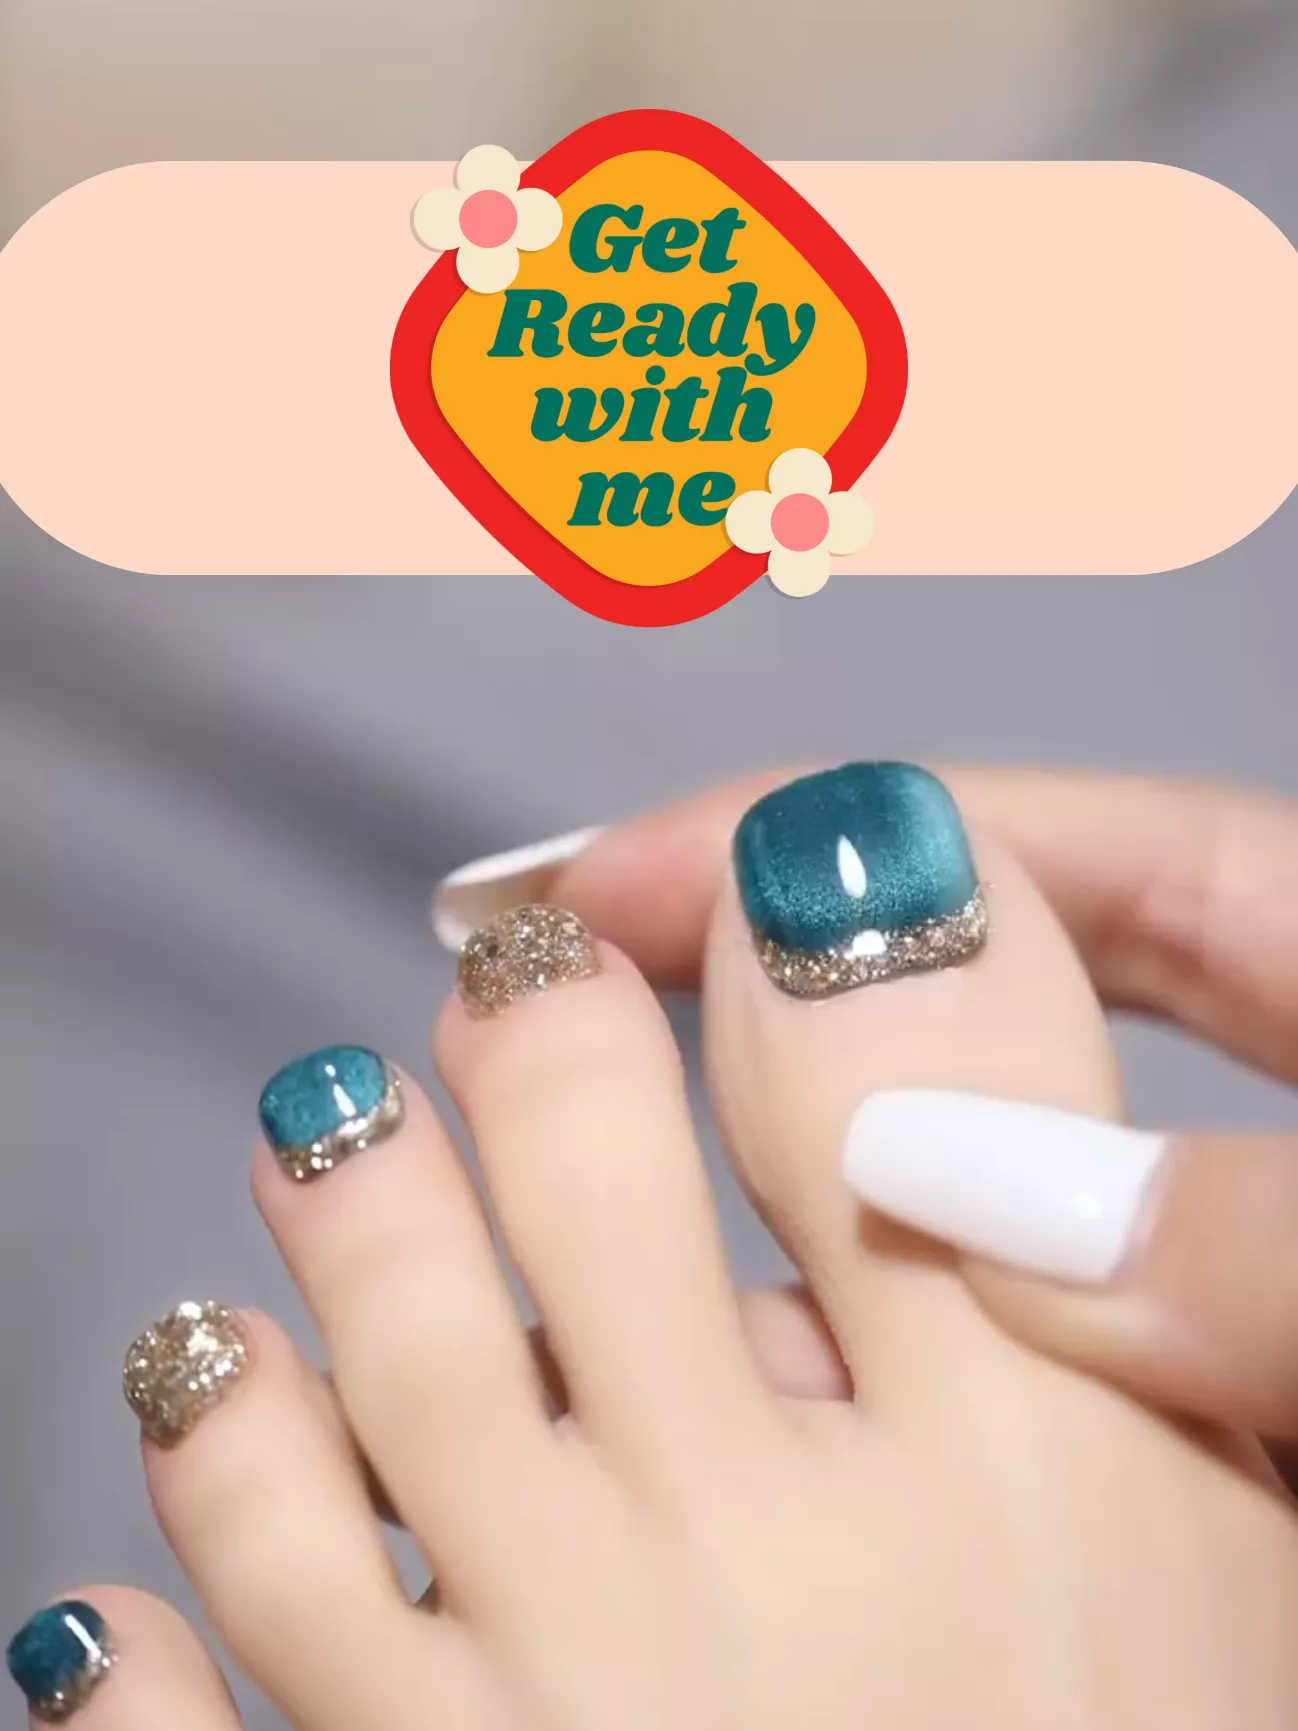 DIY Toe Nail Designs: Easy Ideas For Beginners | Easy toe nail designs, Toe  nail designs, Simple toe nails